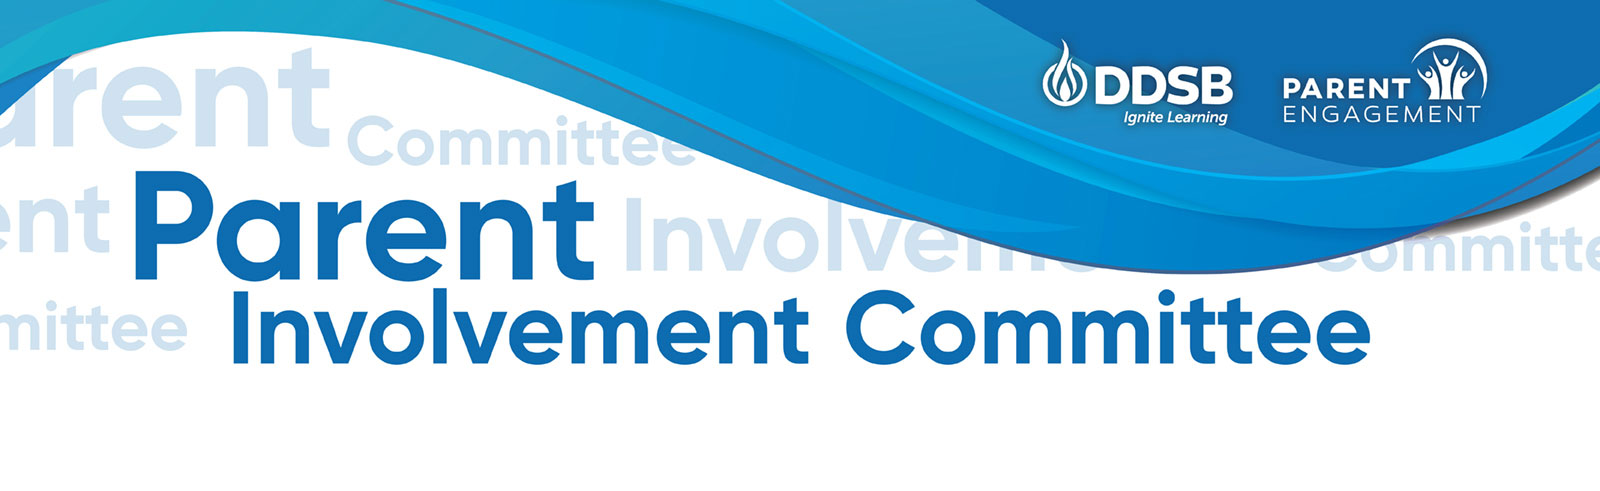 Parent Involvement Committee blue text on white background